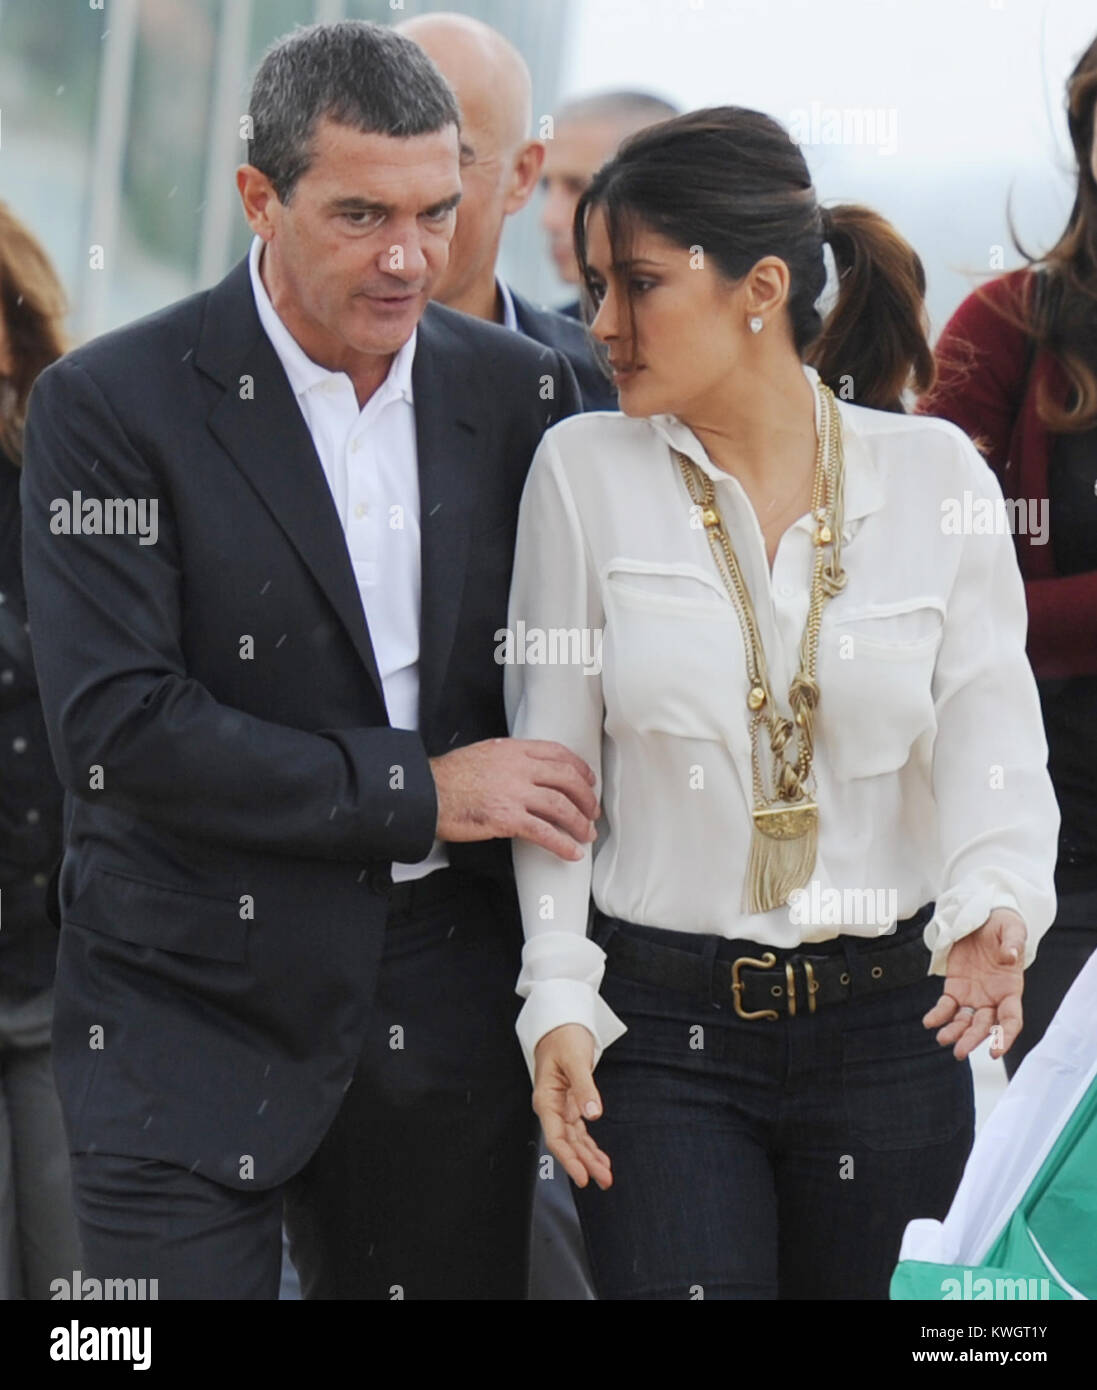 FORT LAUDERDALE, FL - OCTOBER 16: Salma Hayek and Antonio Banderas arrive at the Allure Of The Seas Premiere Of Puss In Boots at Port Everglades. The event was very unorganized and the actors looked miserable.  On October 16, 2011 in Fort Lauderdale, Florida   People:  Salma Hayek Antonio Banderas Stock Photo